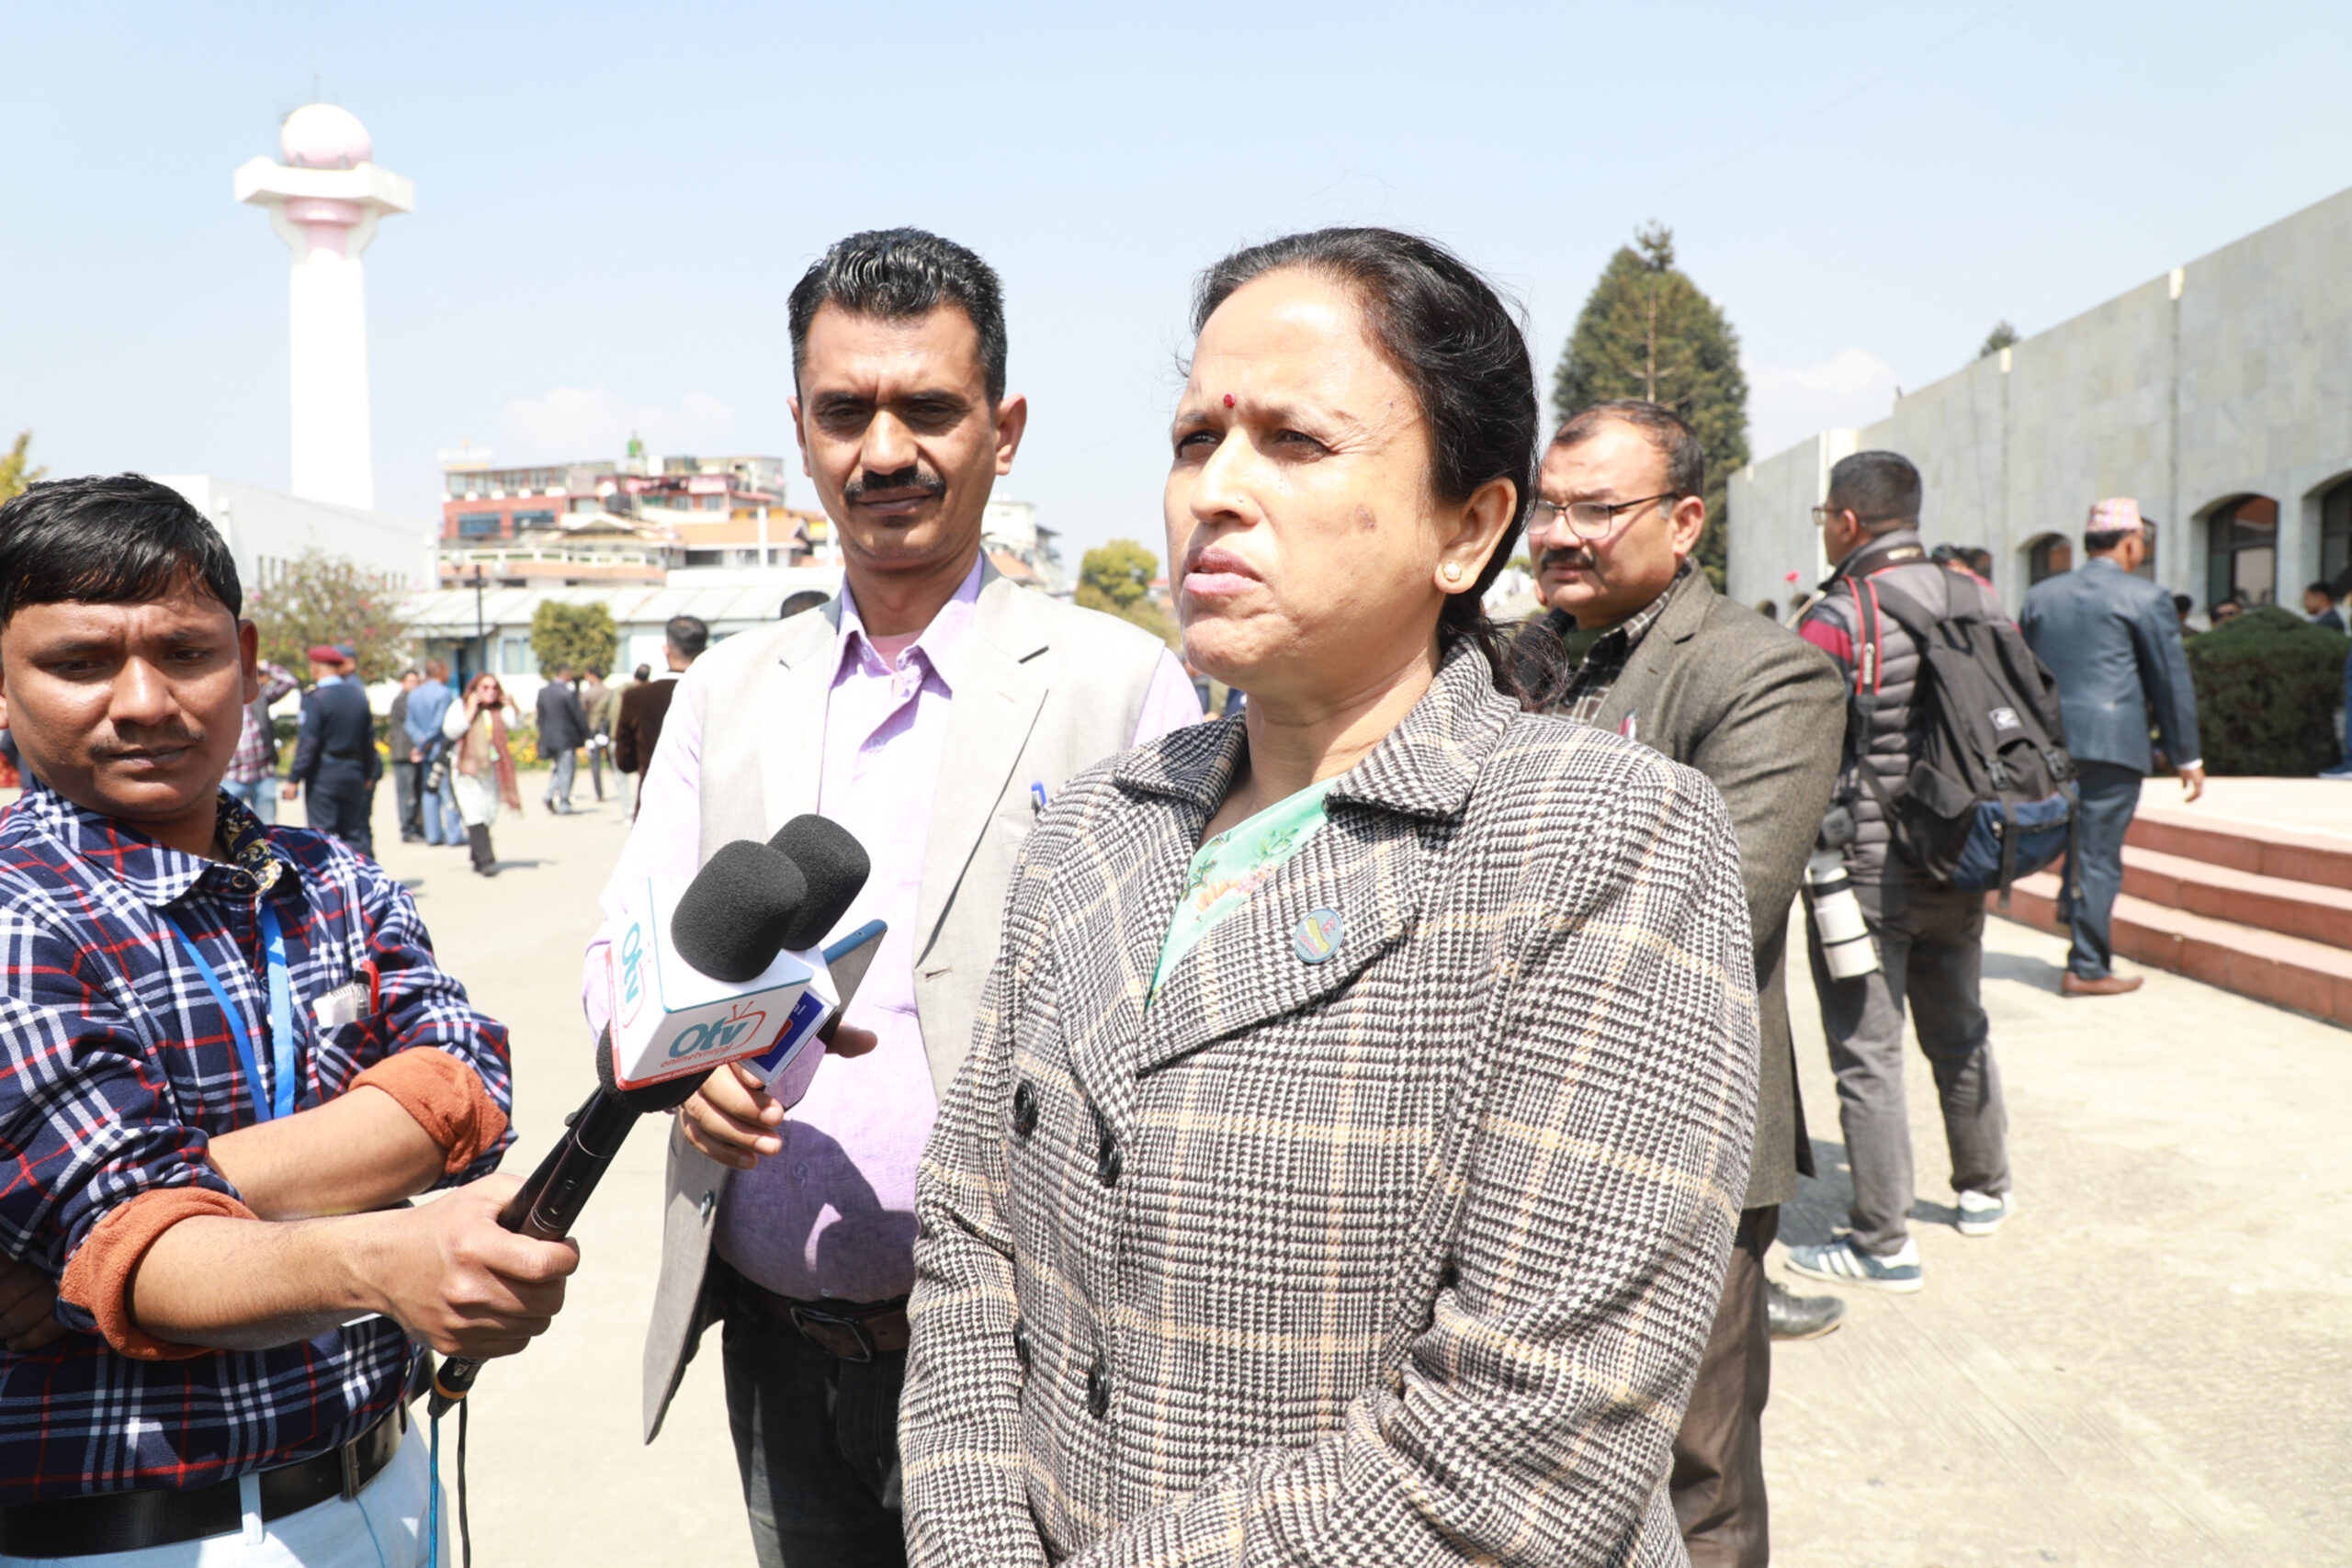 Minister Sharma provides relief materials to quake-affected journalists